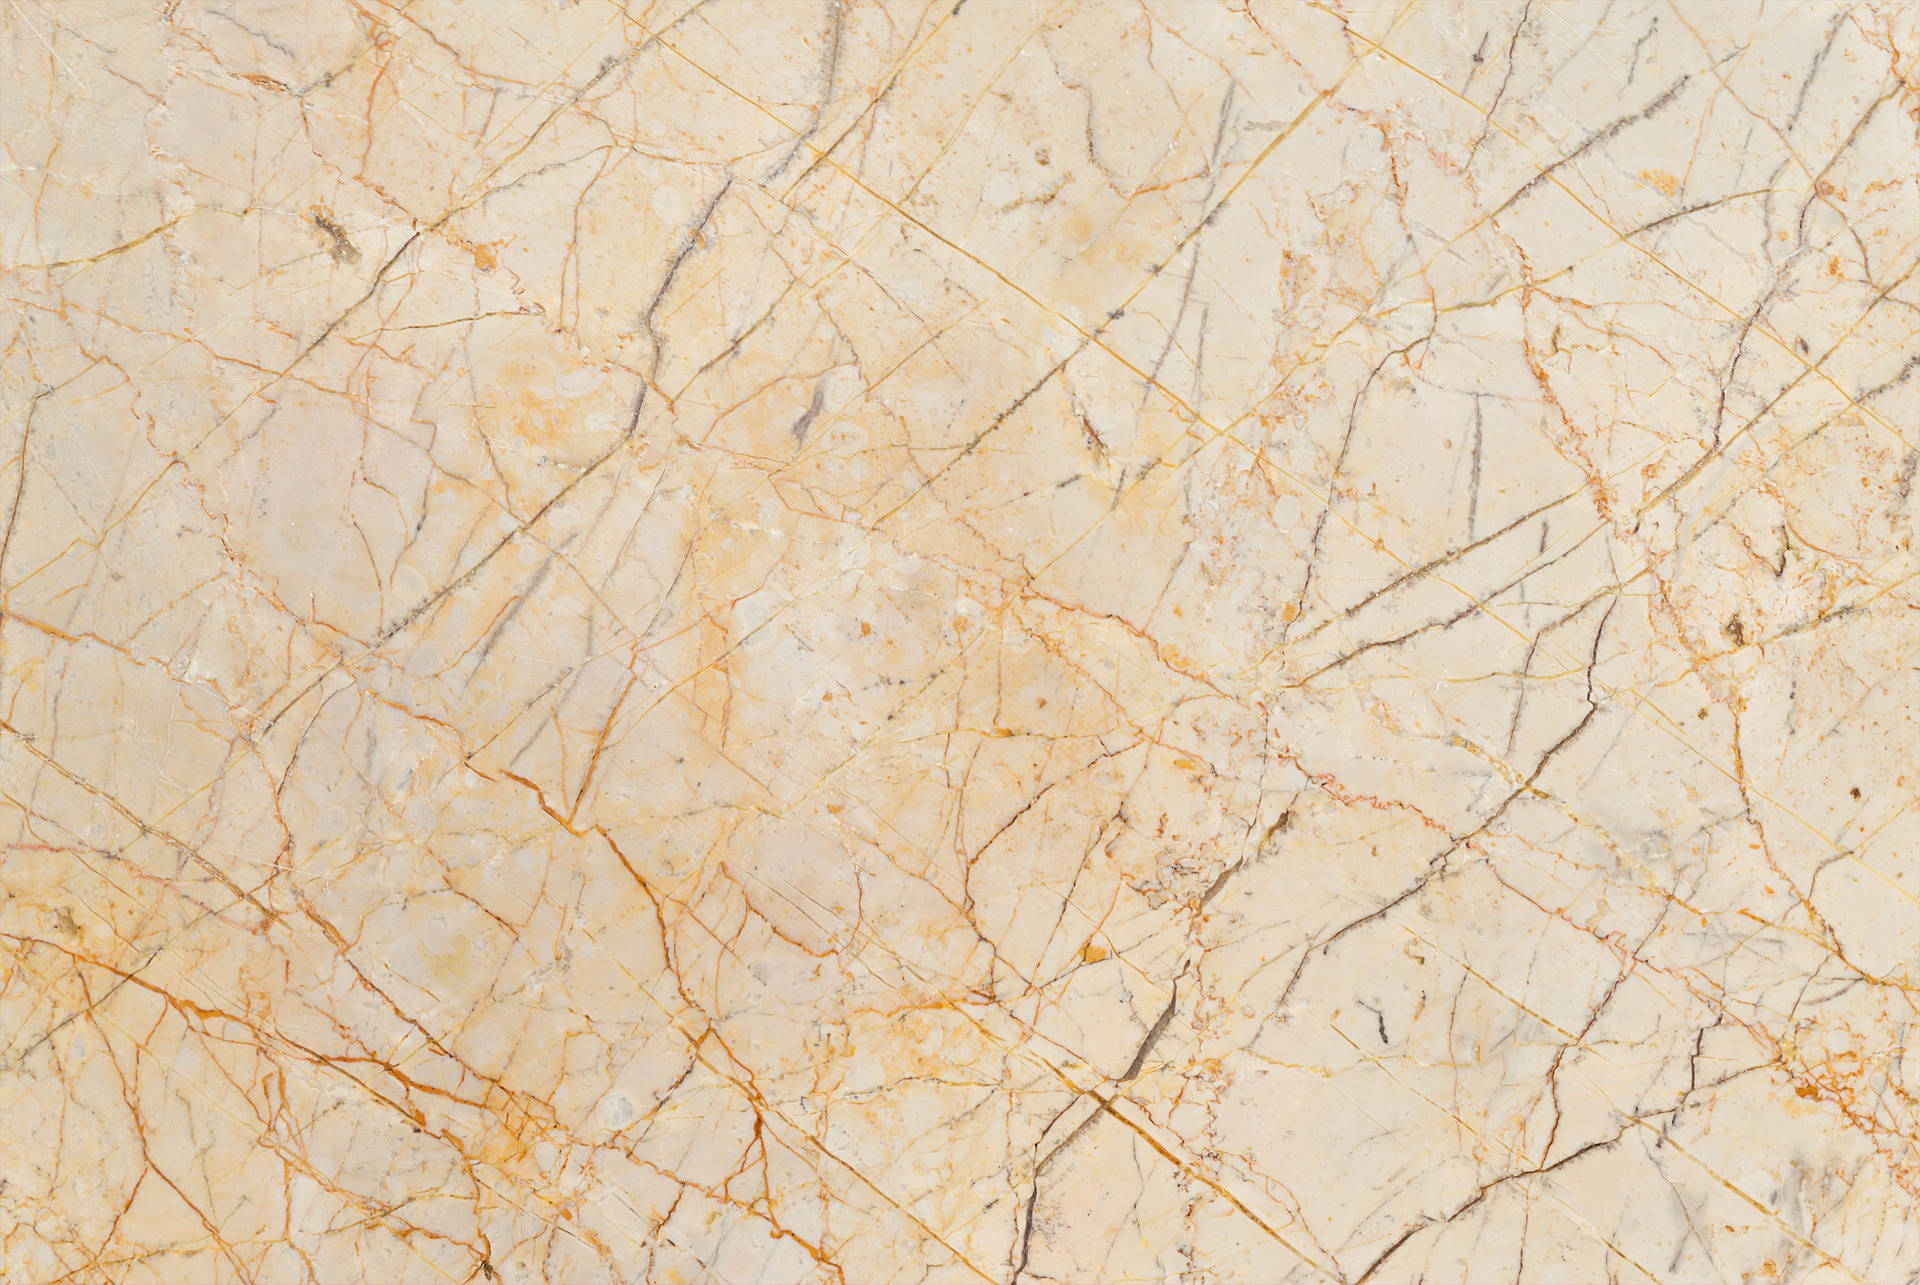 Scratched Cream Marble Laptop Wallpaper